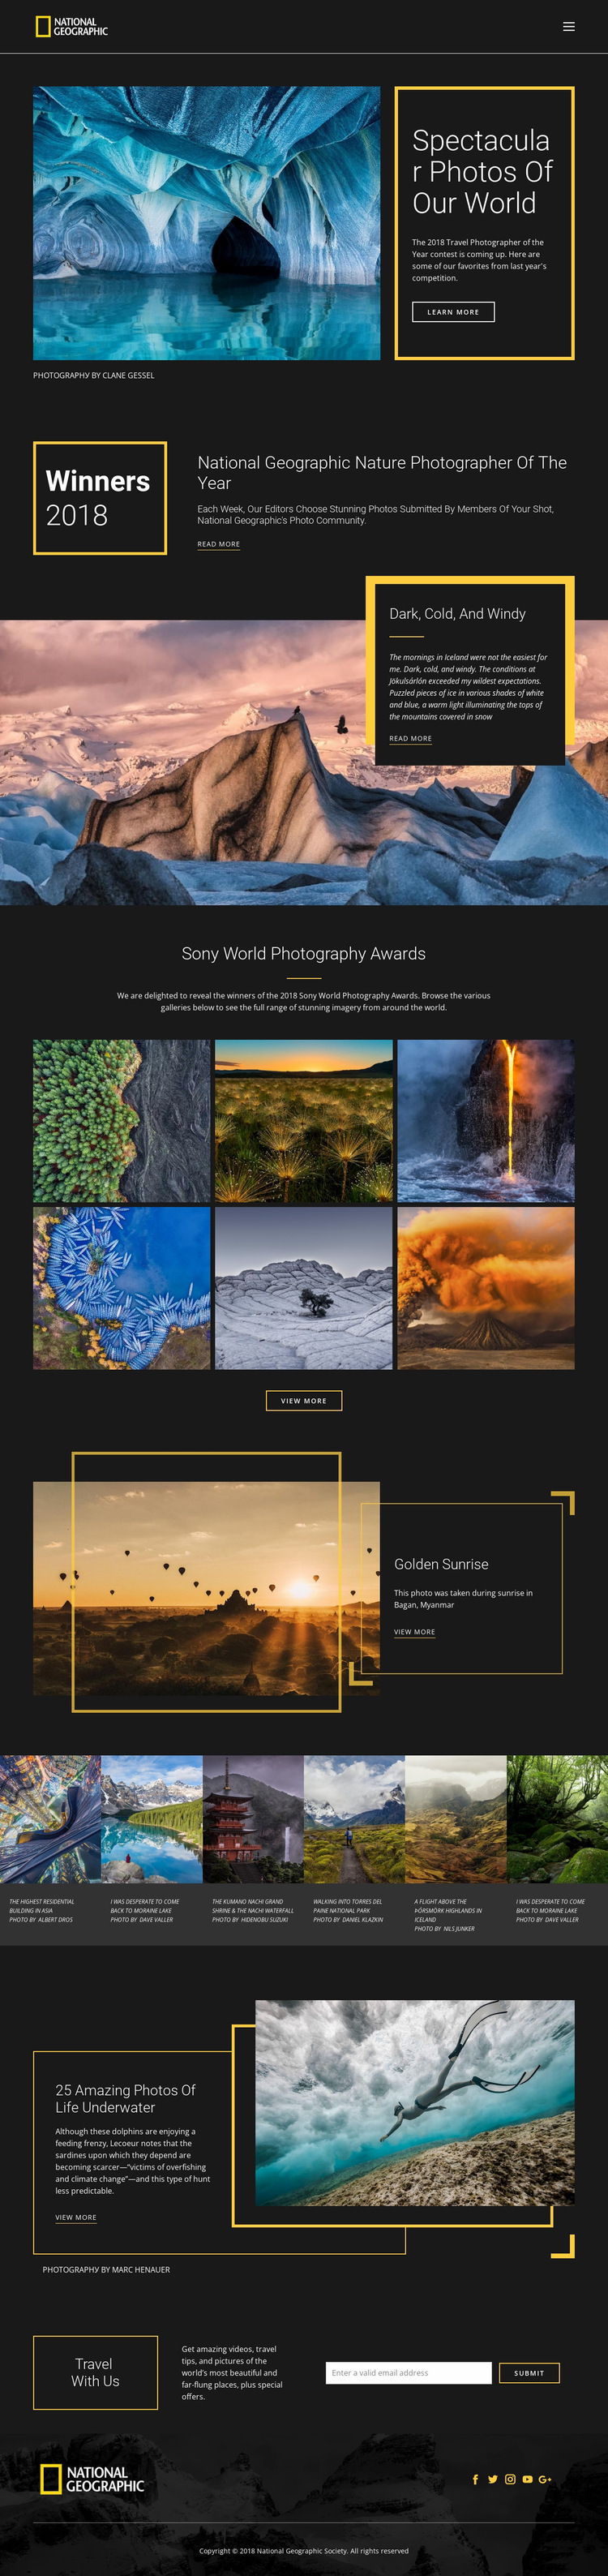 Pictures of nature Website Builder Templates